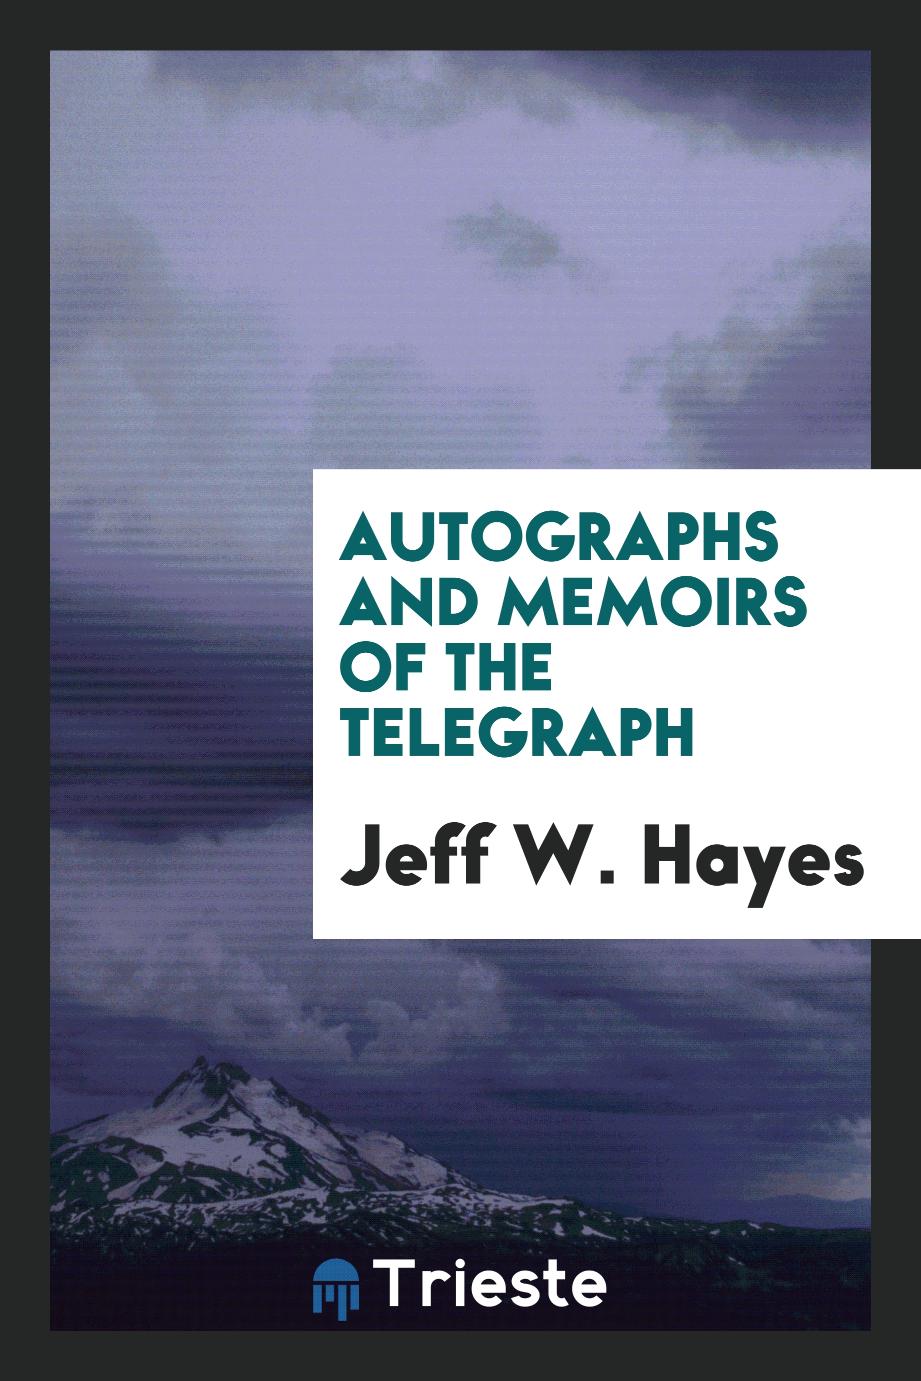 Autographs and memoirs of the telegraph